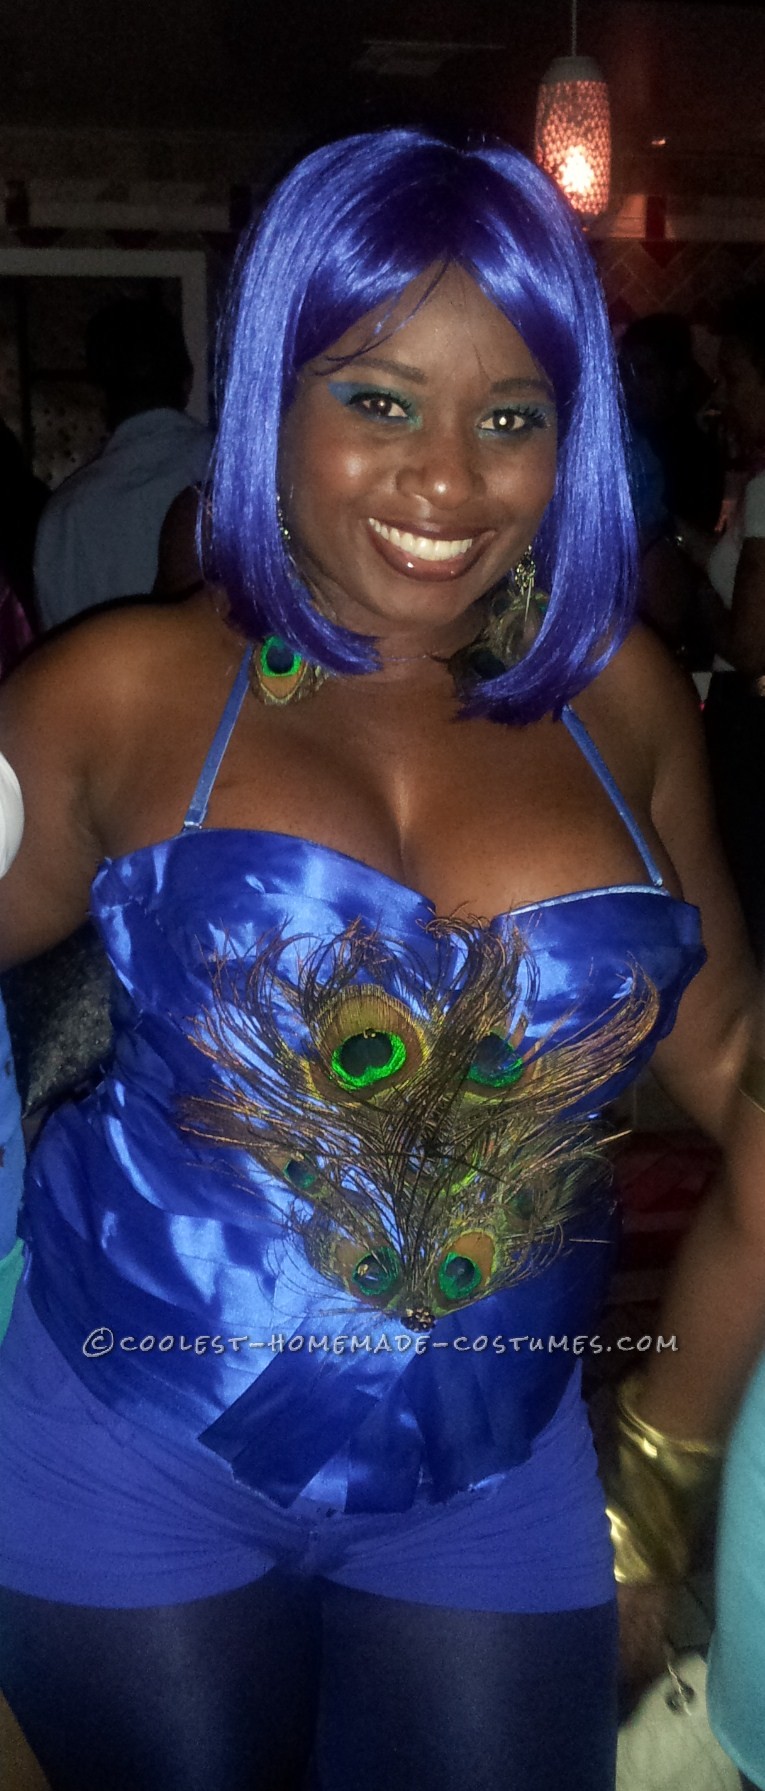 This costume was inspired by favorite color blue. I purchased a white corset from fredricks and covered with blue ribbon. The peacock feathers I took